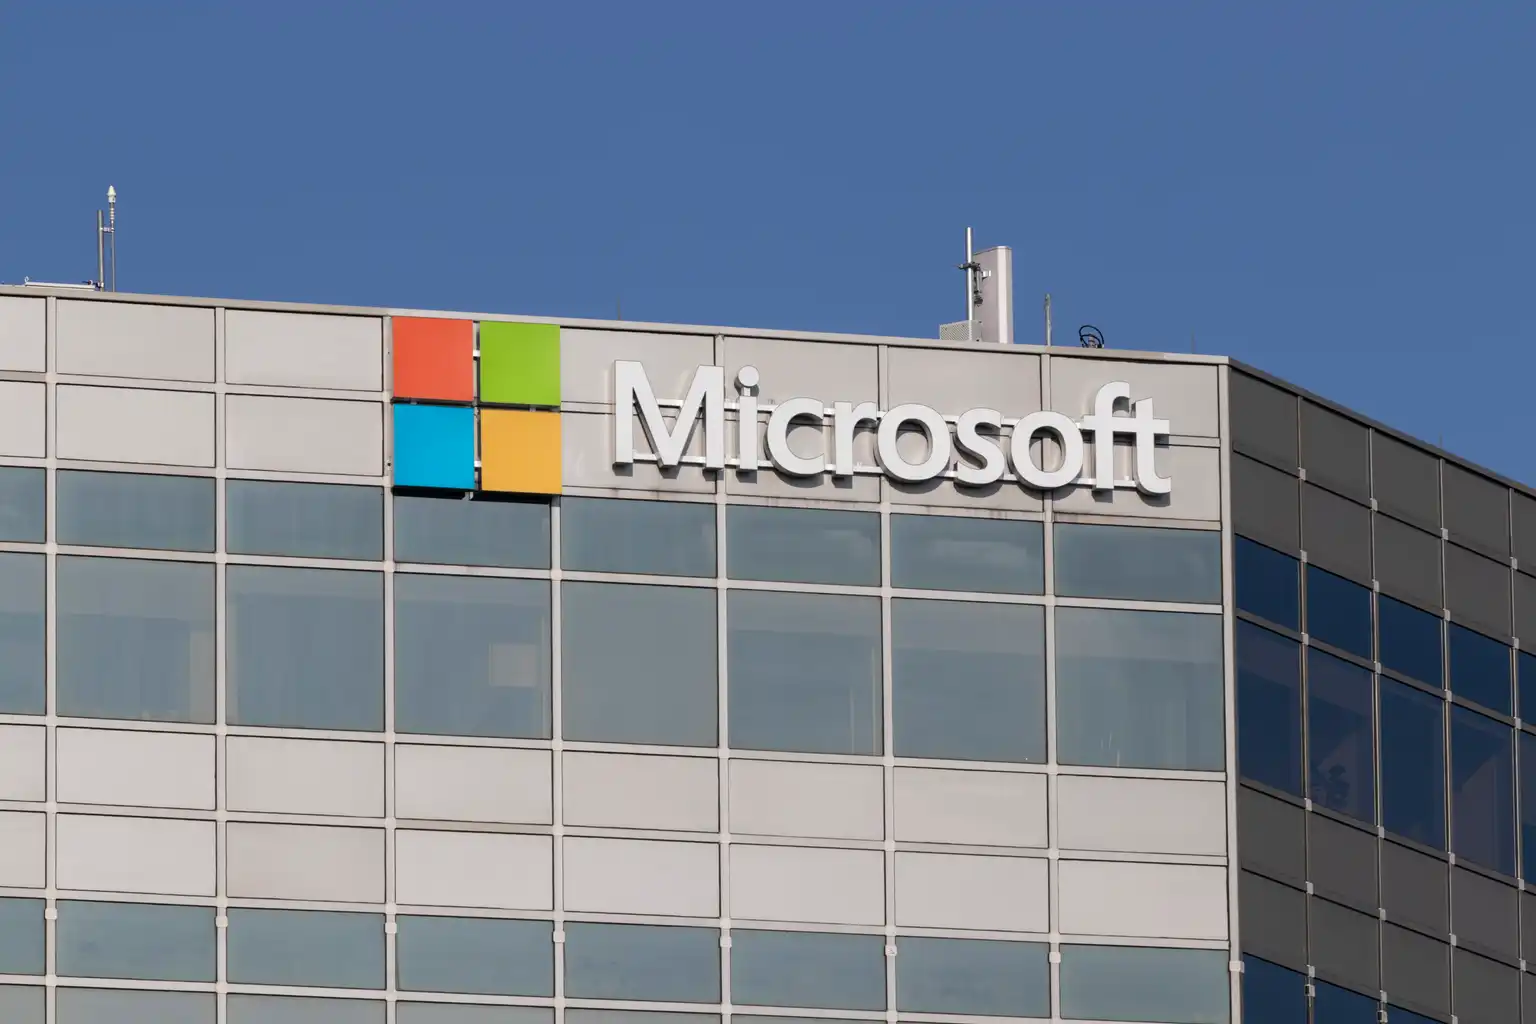 Microsoft: Copilot And Cloud To Deliver Next Leg Of Growth - Seeking Alpha